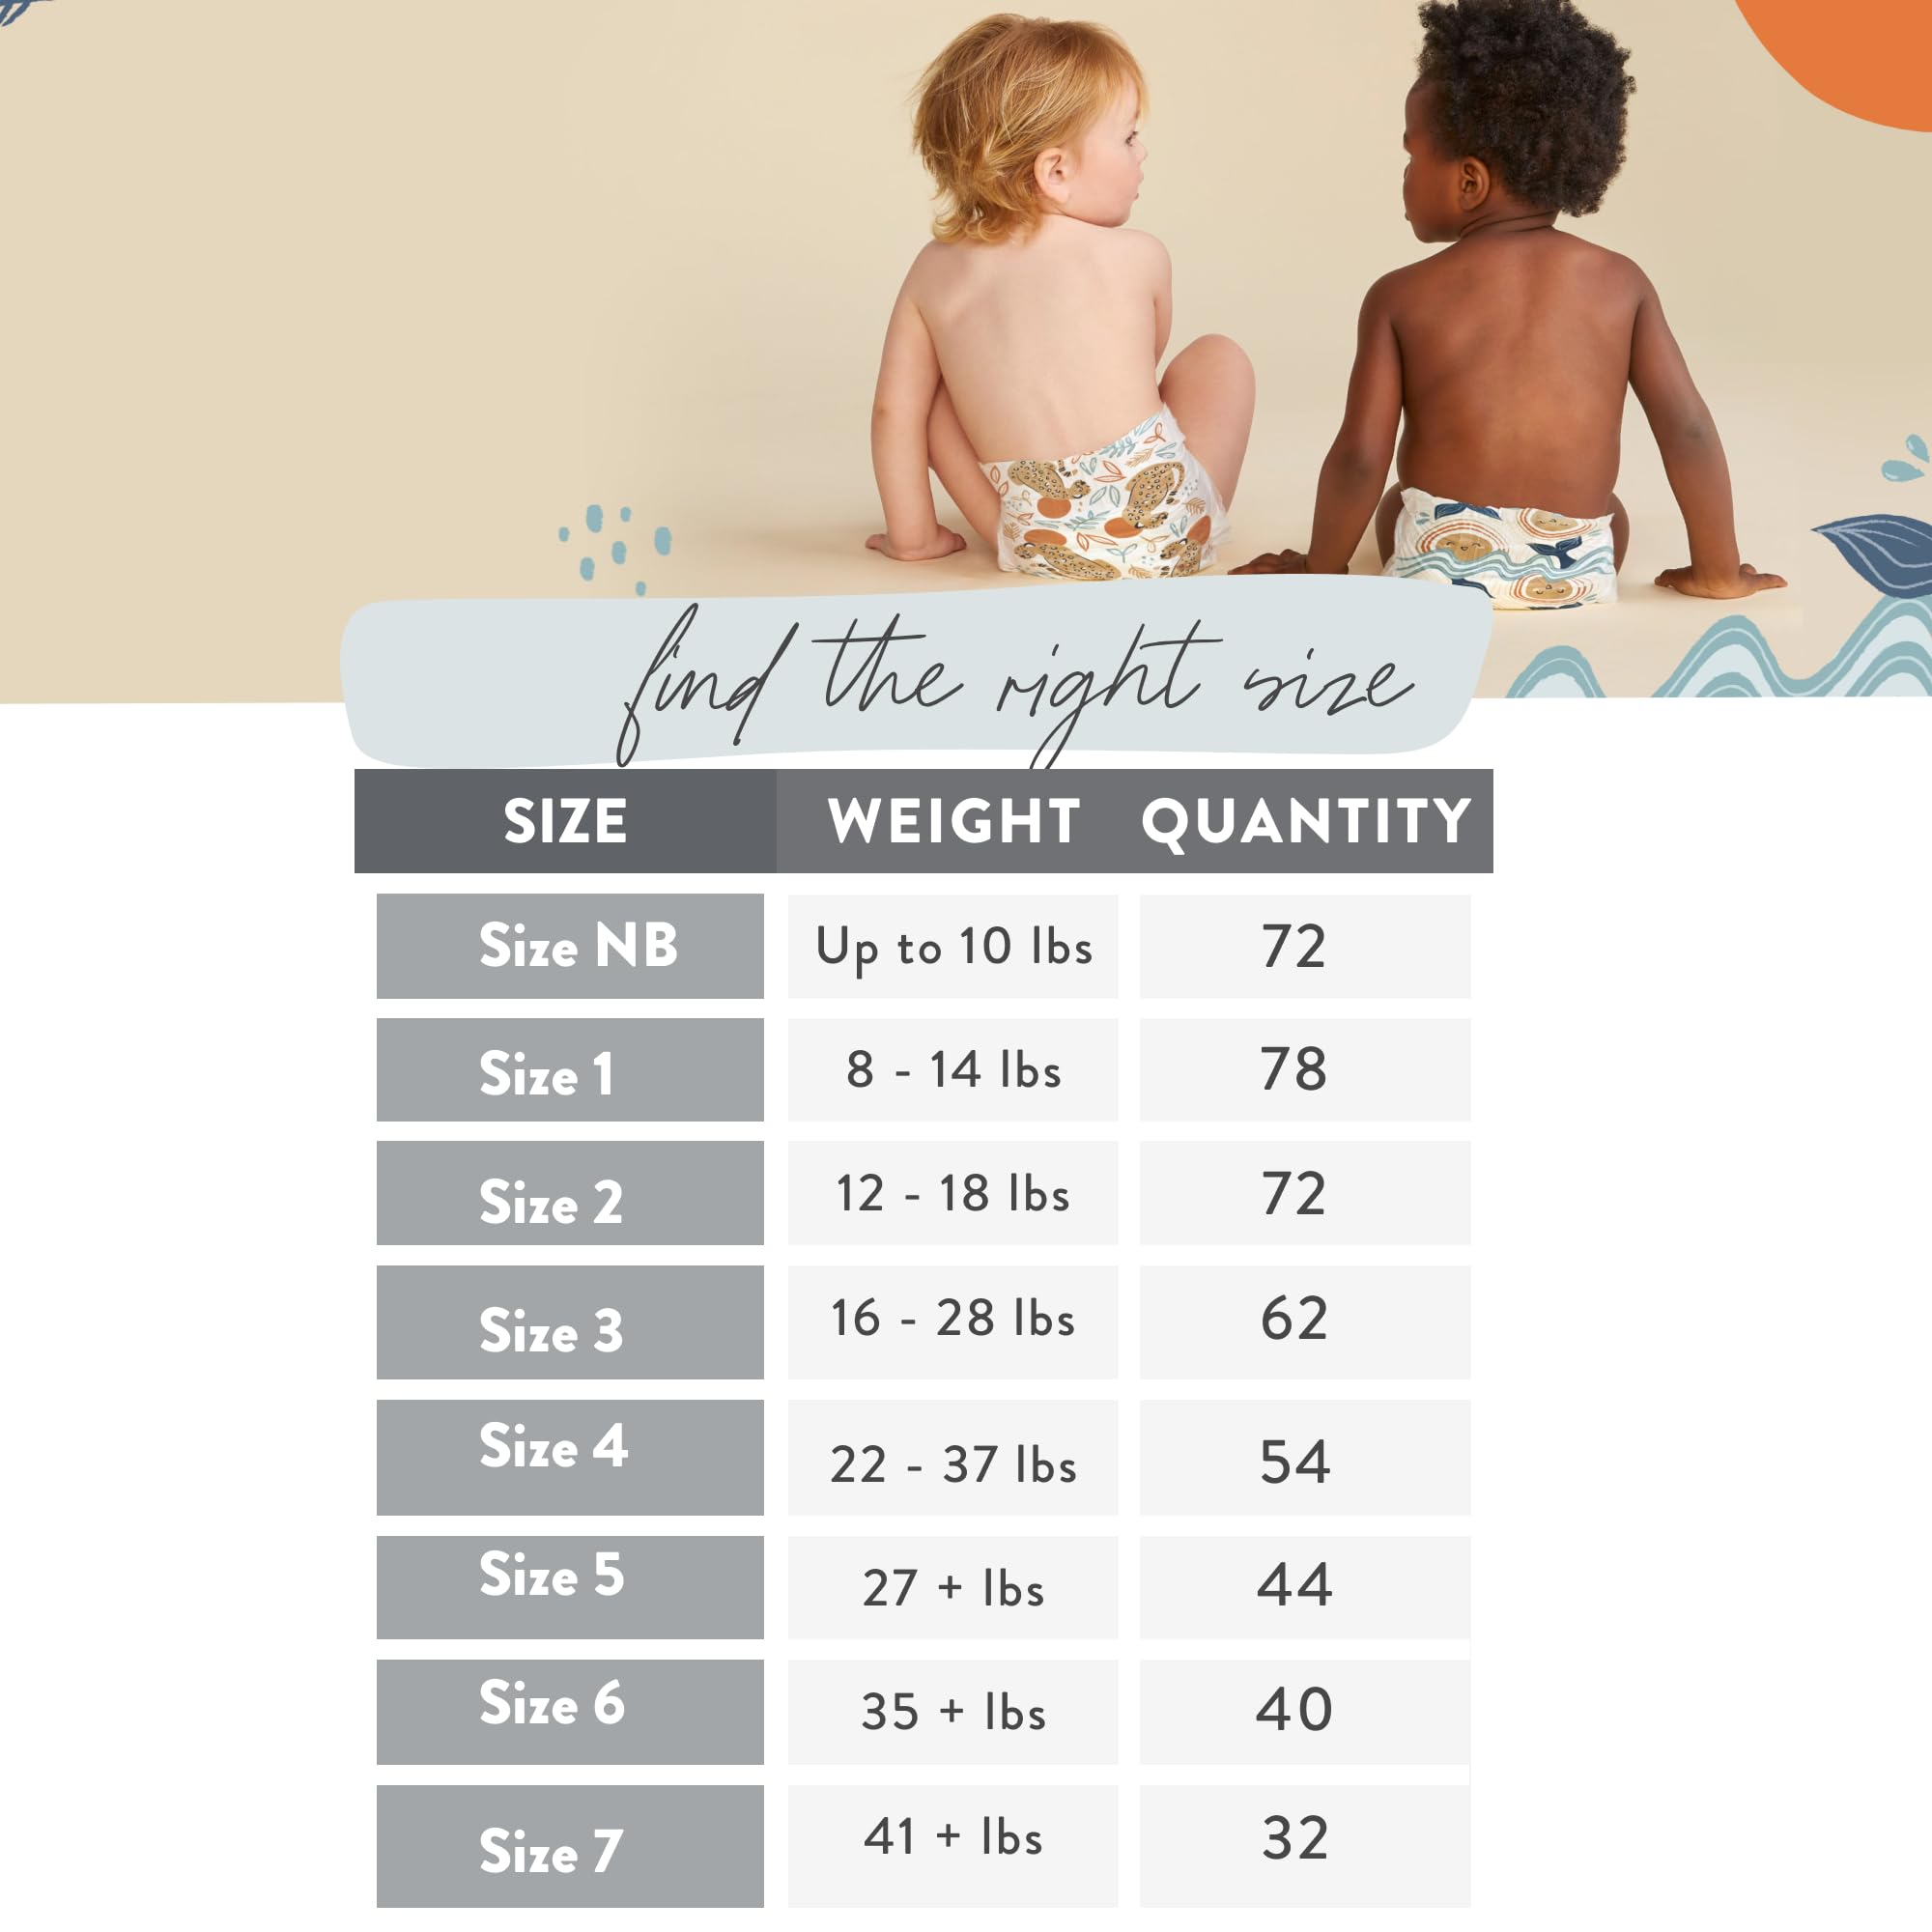 The Honest Company Clean Conscious Diapers | Plant-Based, Sustainable | Big Trucks + So Bananas | Club Box, Size 5 (27+ lbs), 44 Count